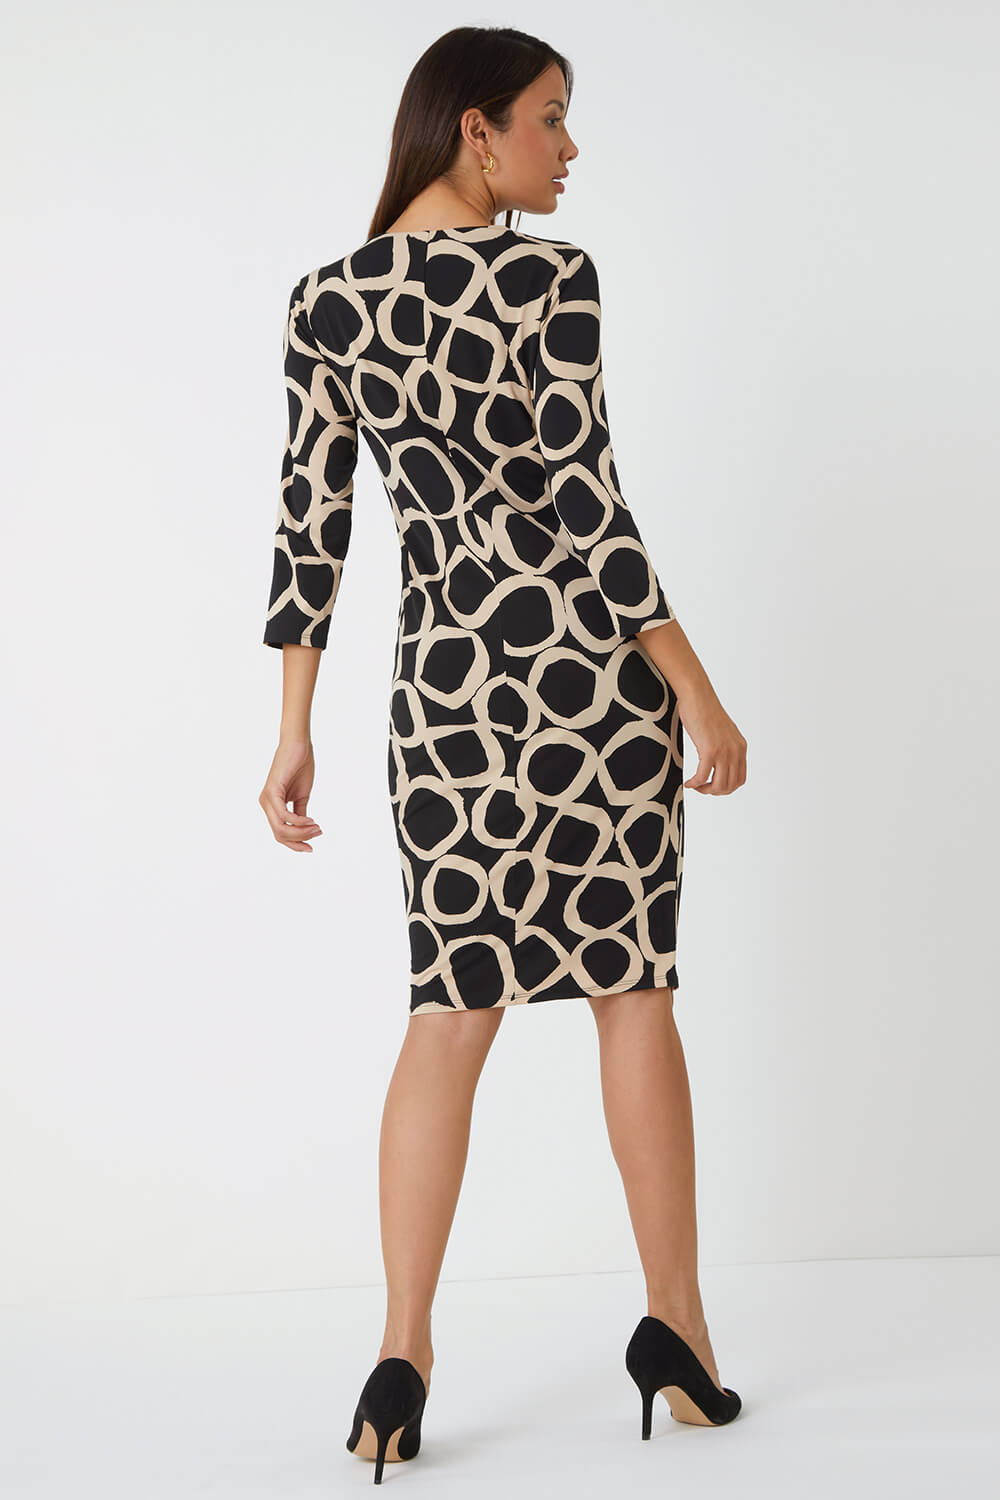 Stone Abstract Print Ruched Stretch Dress, Image 3 of 5